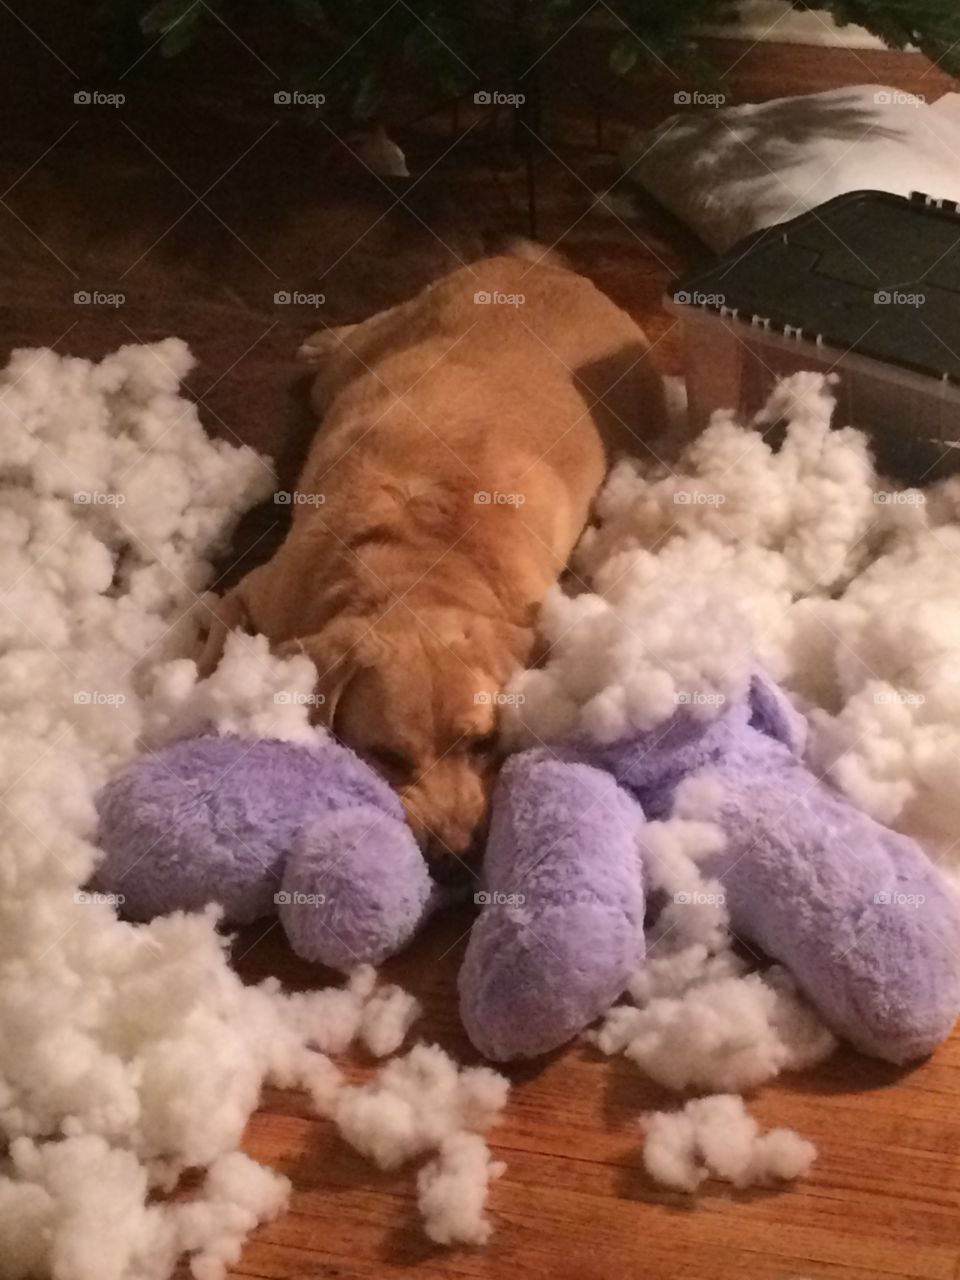 Puppy and his destroyed toy 